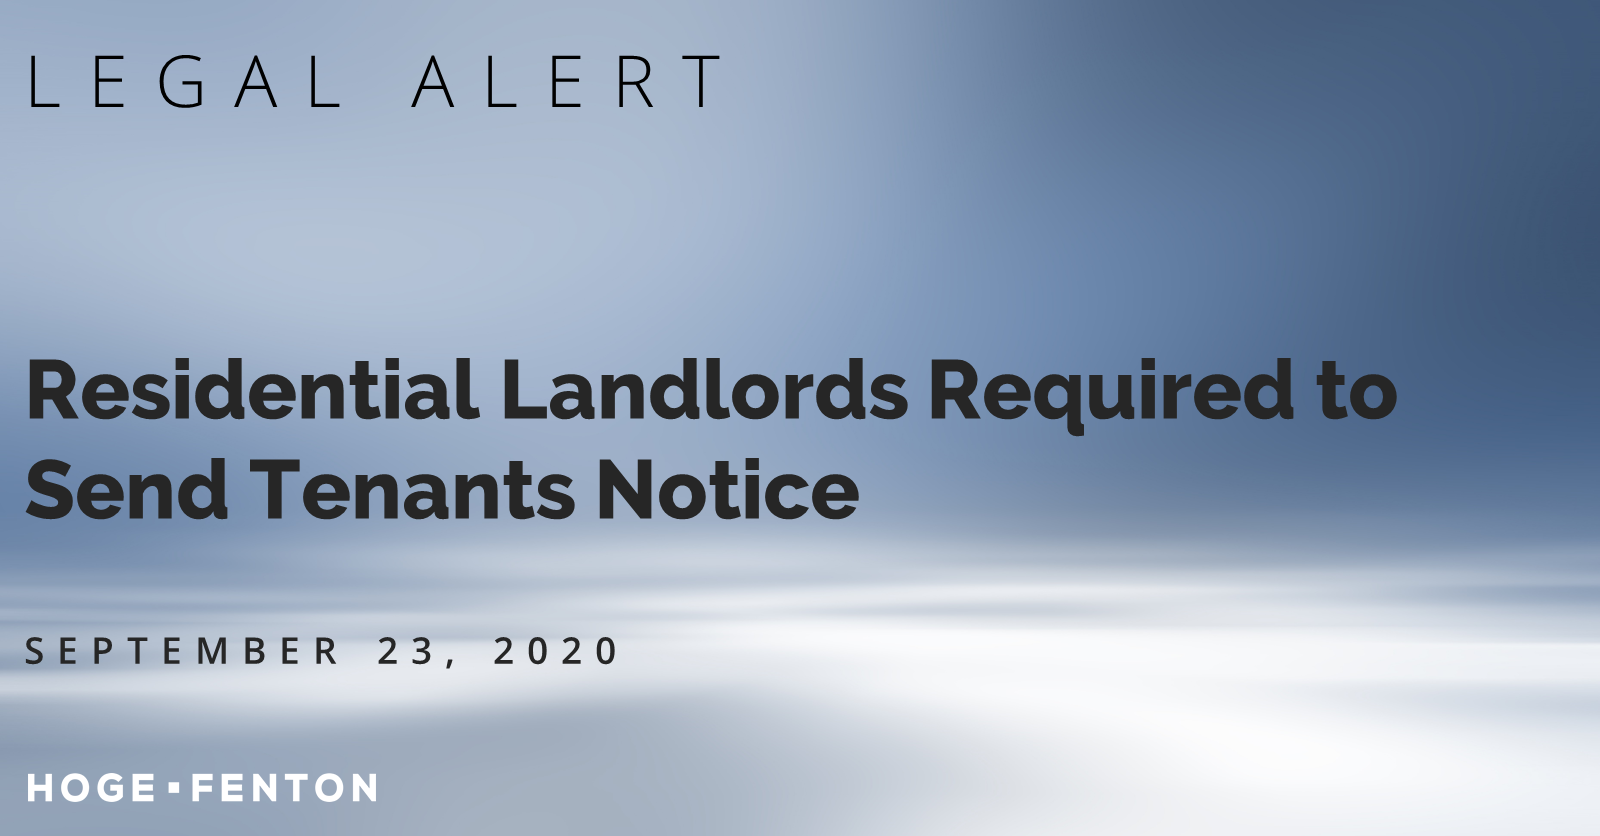 Residential Landlords Required to Send Tenants Notice